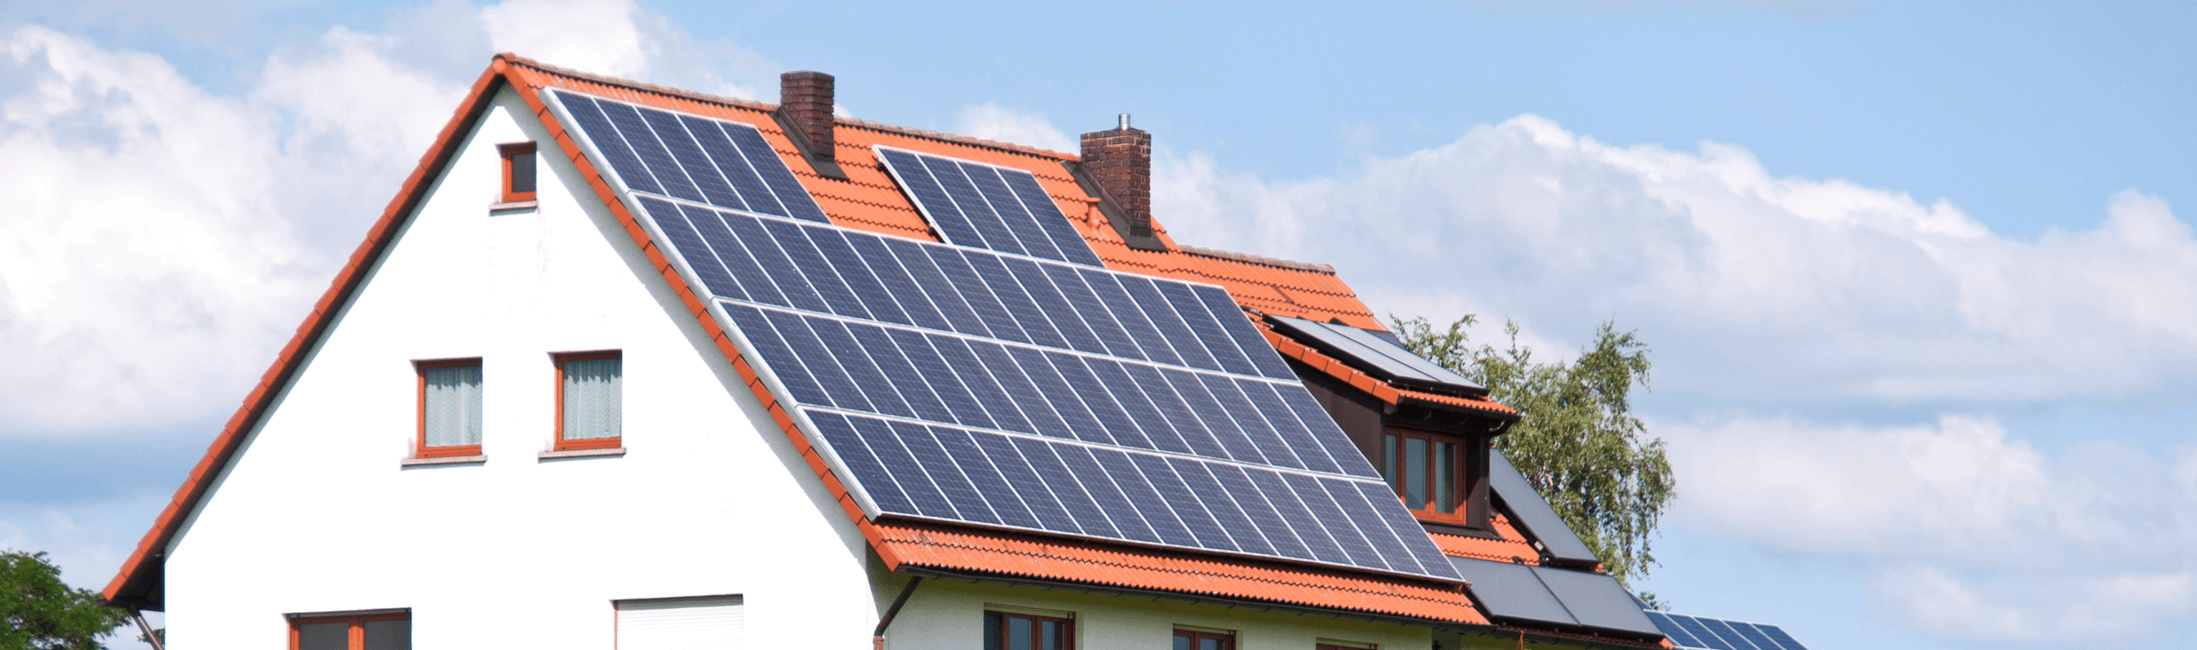 The rooftop solar tax could double the pain